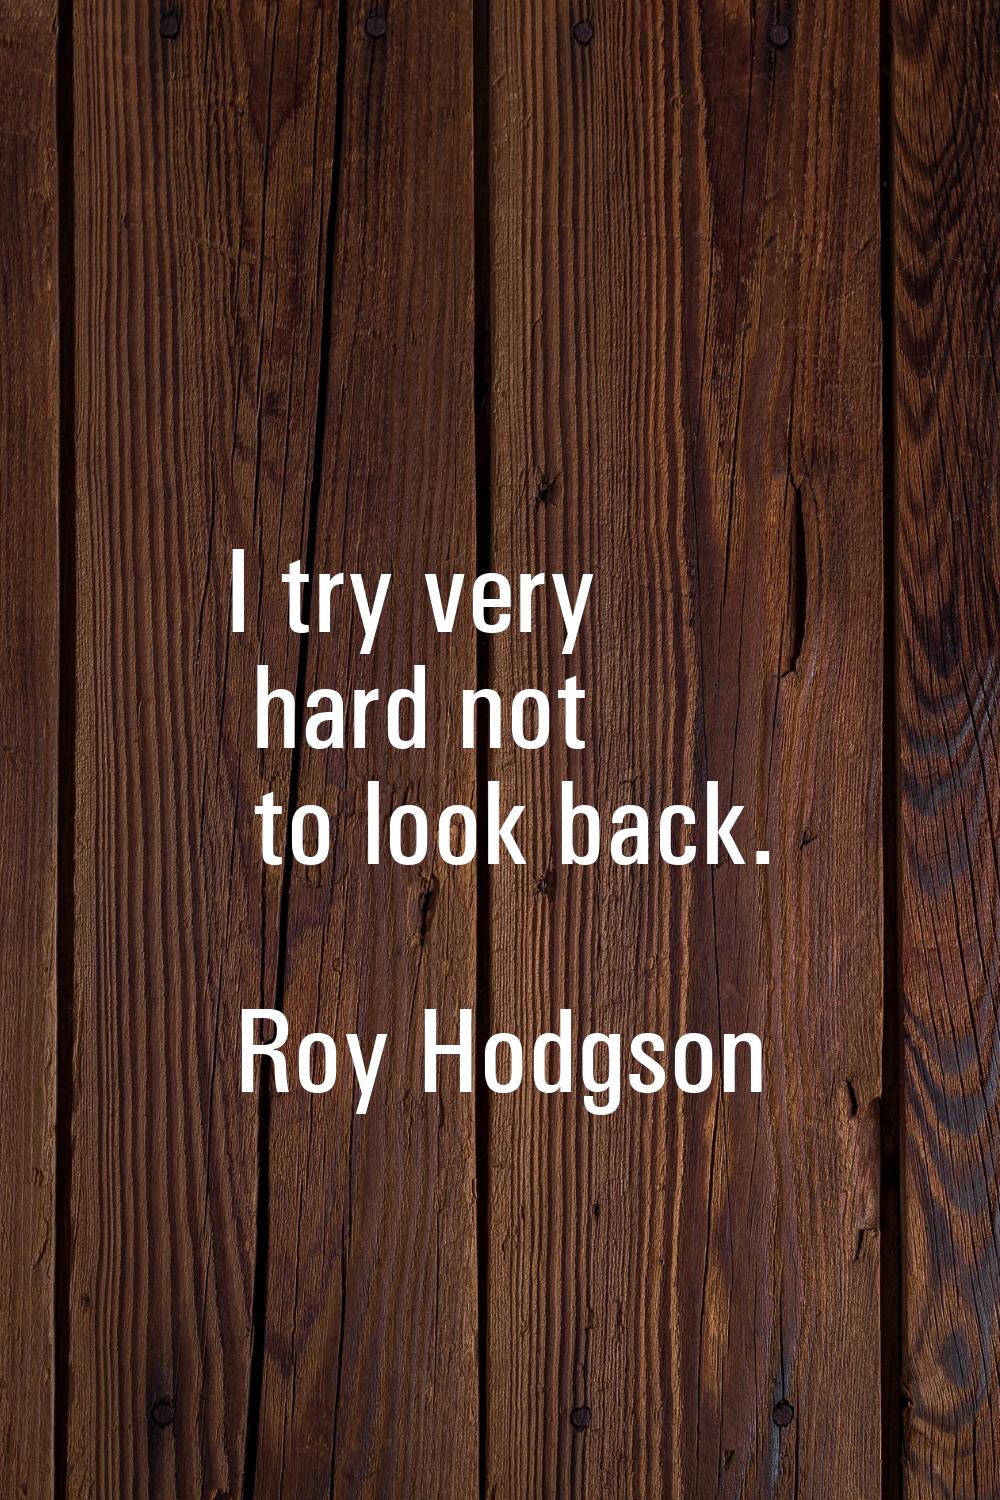 I try very hard not to look back.